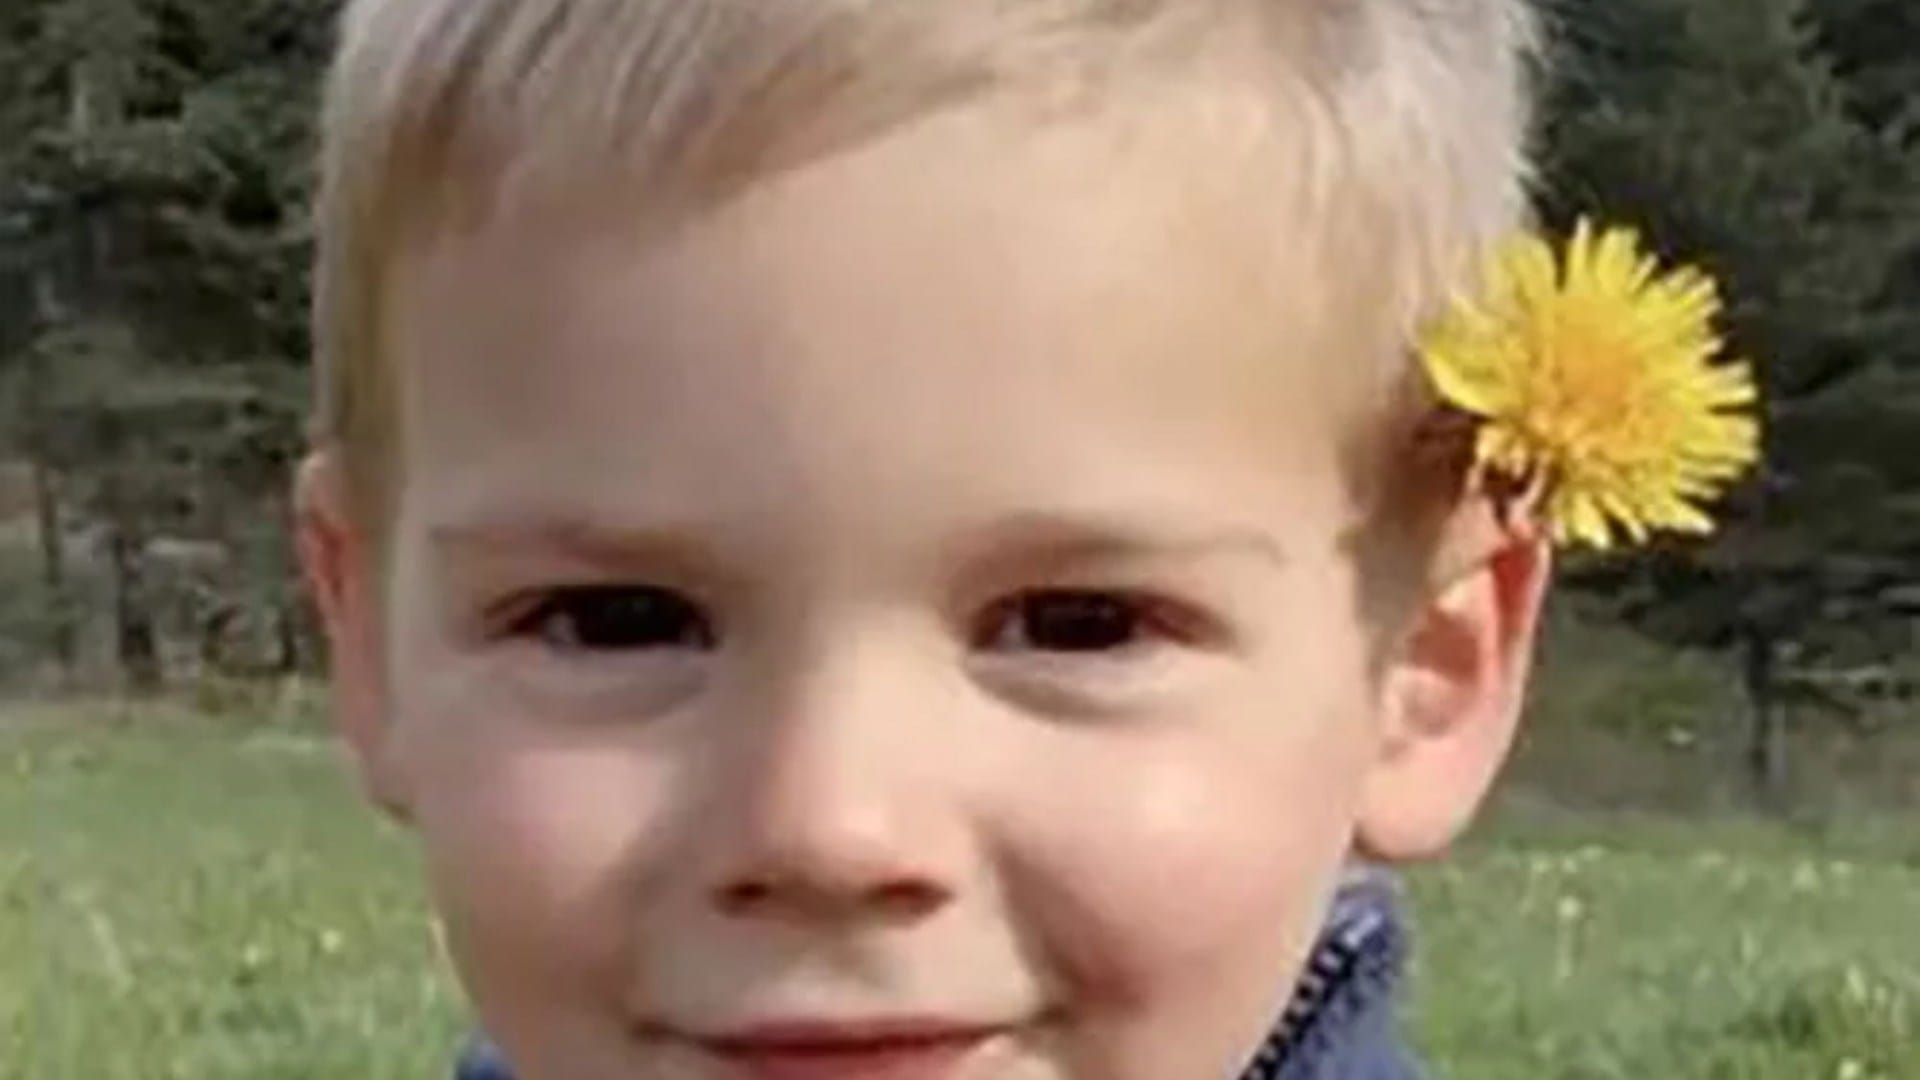 Ex-CIA psychic claims he identified area where missing toddler Emile Soleil's body was found & immediately told police